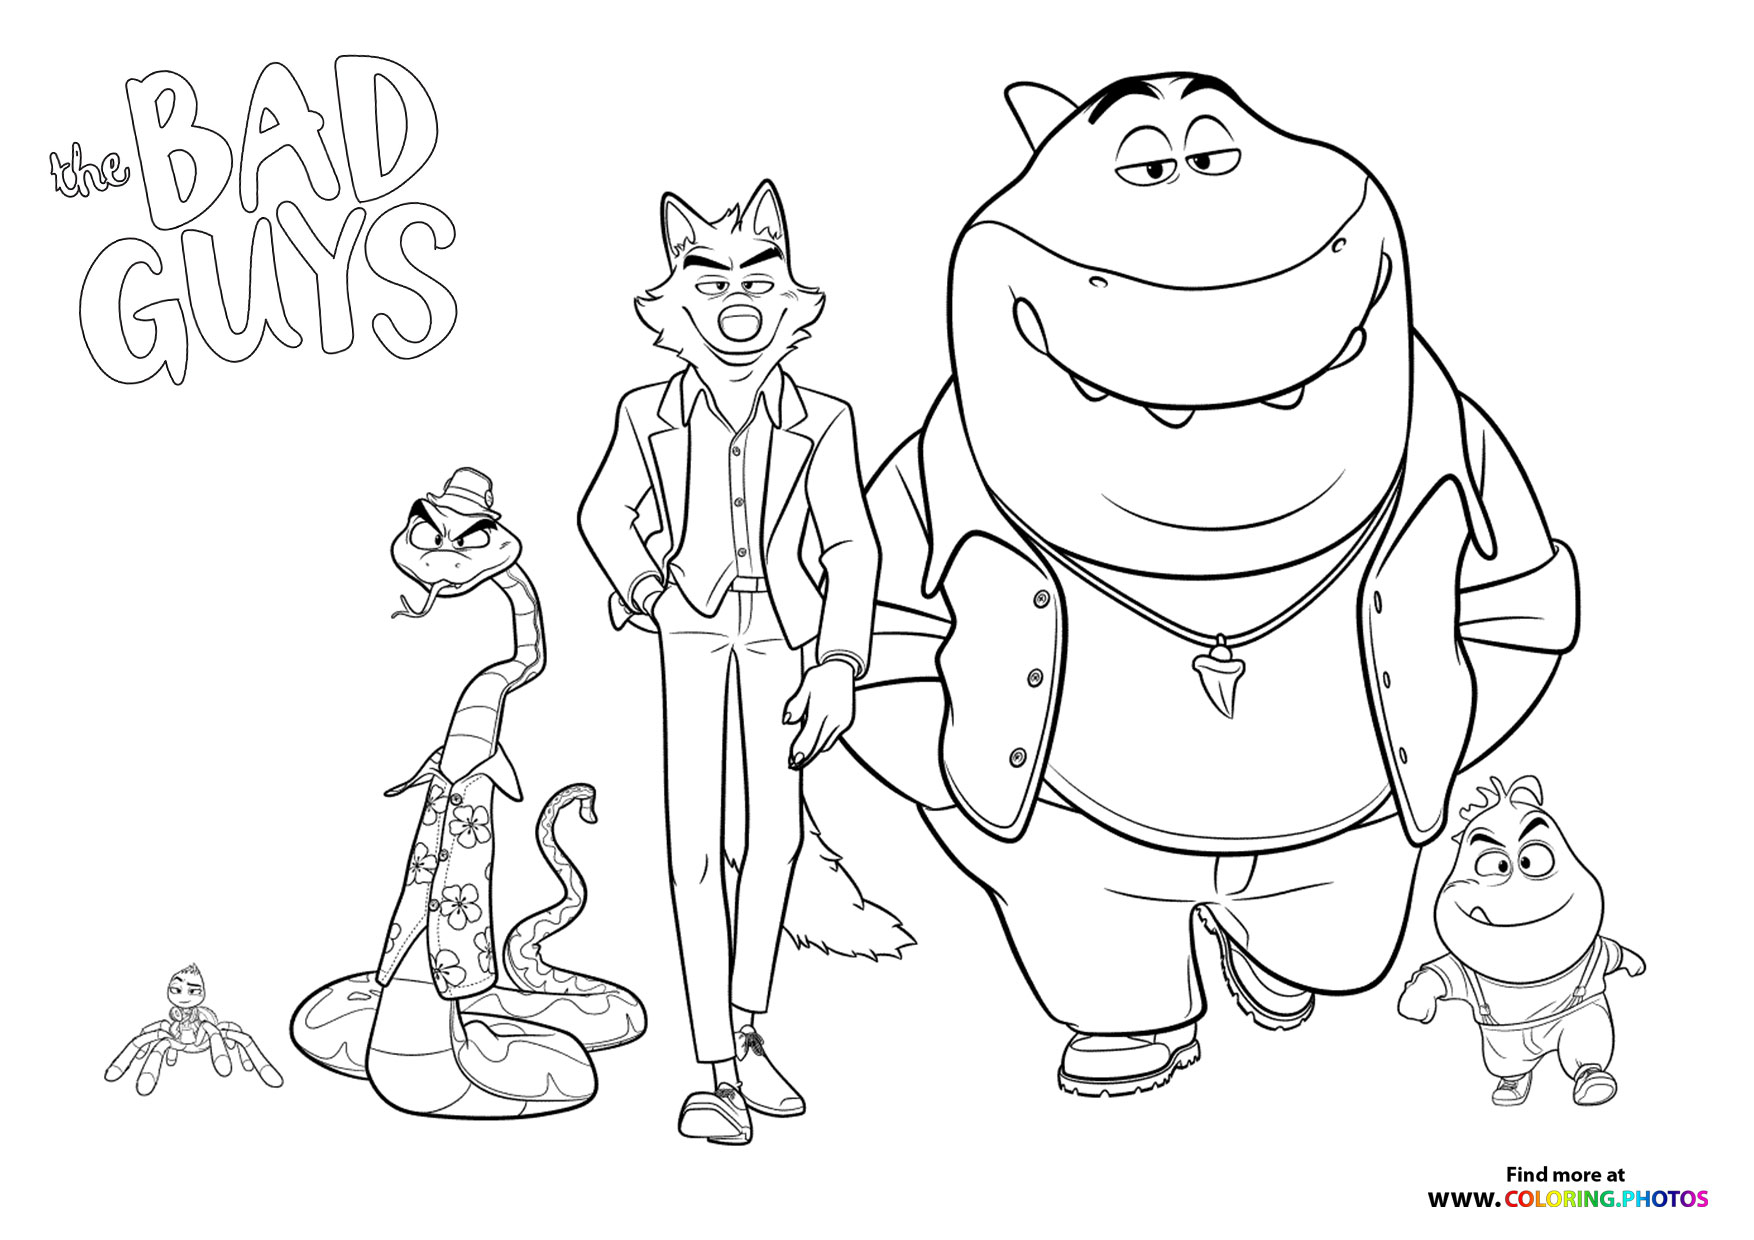 The bad guys - Coloring Pages for kids